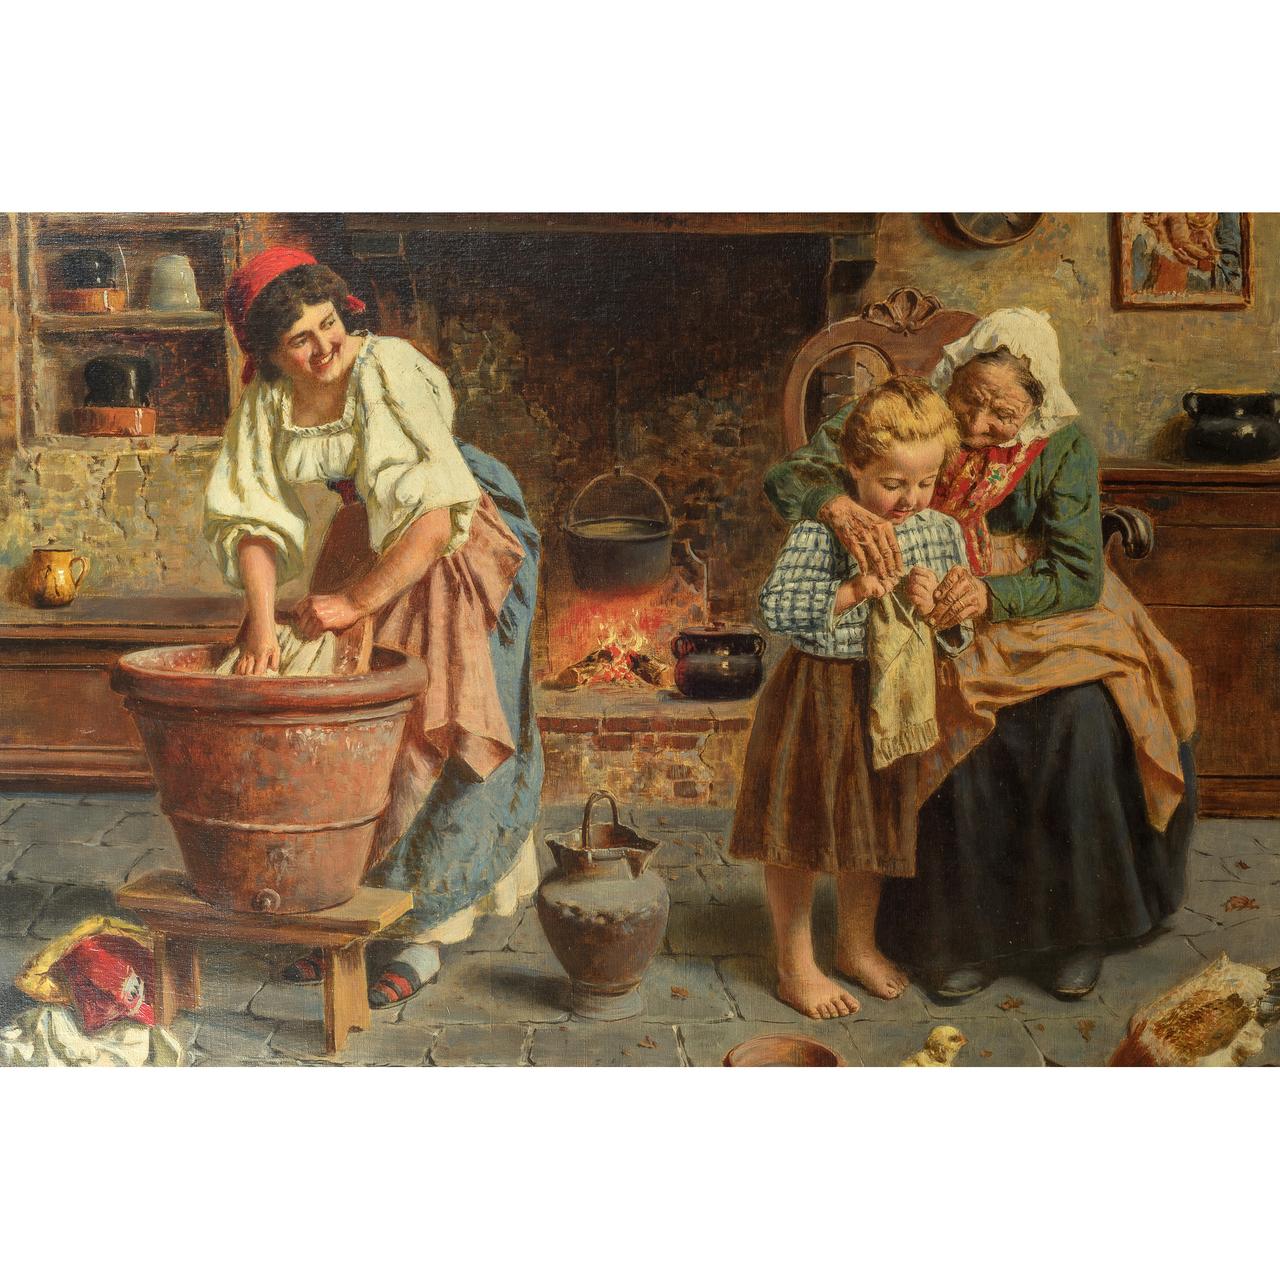 19th century painting entitled knitting lesson by Eugenio Zampighi
Title: Knitting Lesson
Artist: Eugenio Zampighi (1859–1944)
Origin: Italian
signed E. Zampighi (lower right)
Dimension: 27 in x 34 1/2 in.